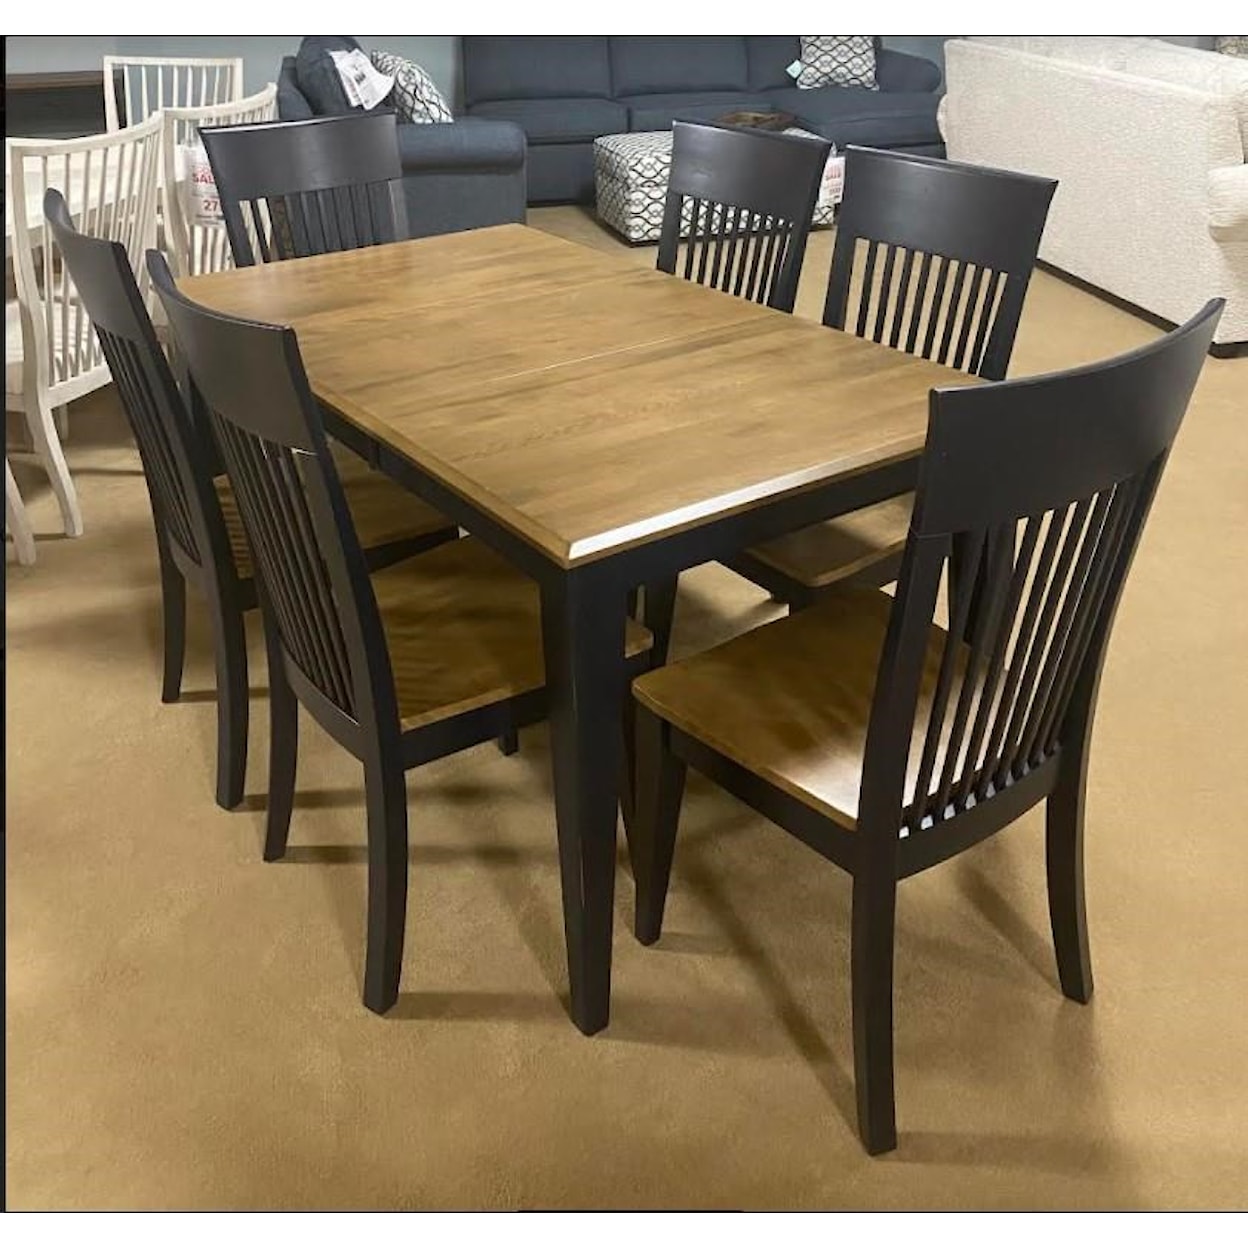 Canadel Gourmet. Casual Dining Table and Chairs